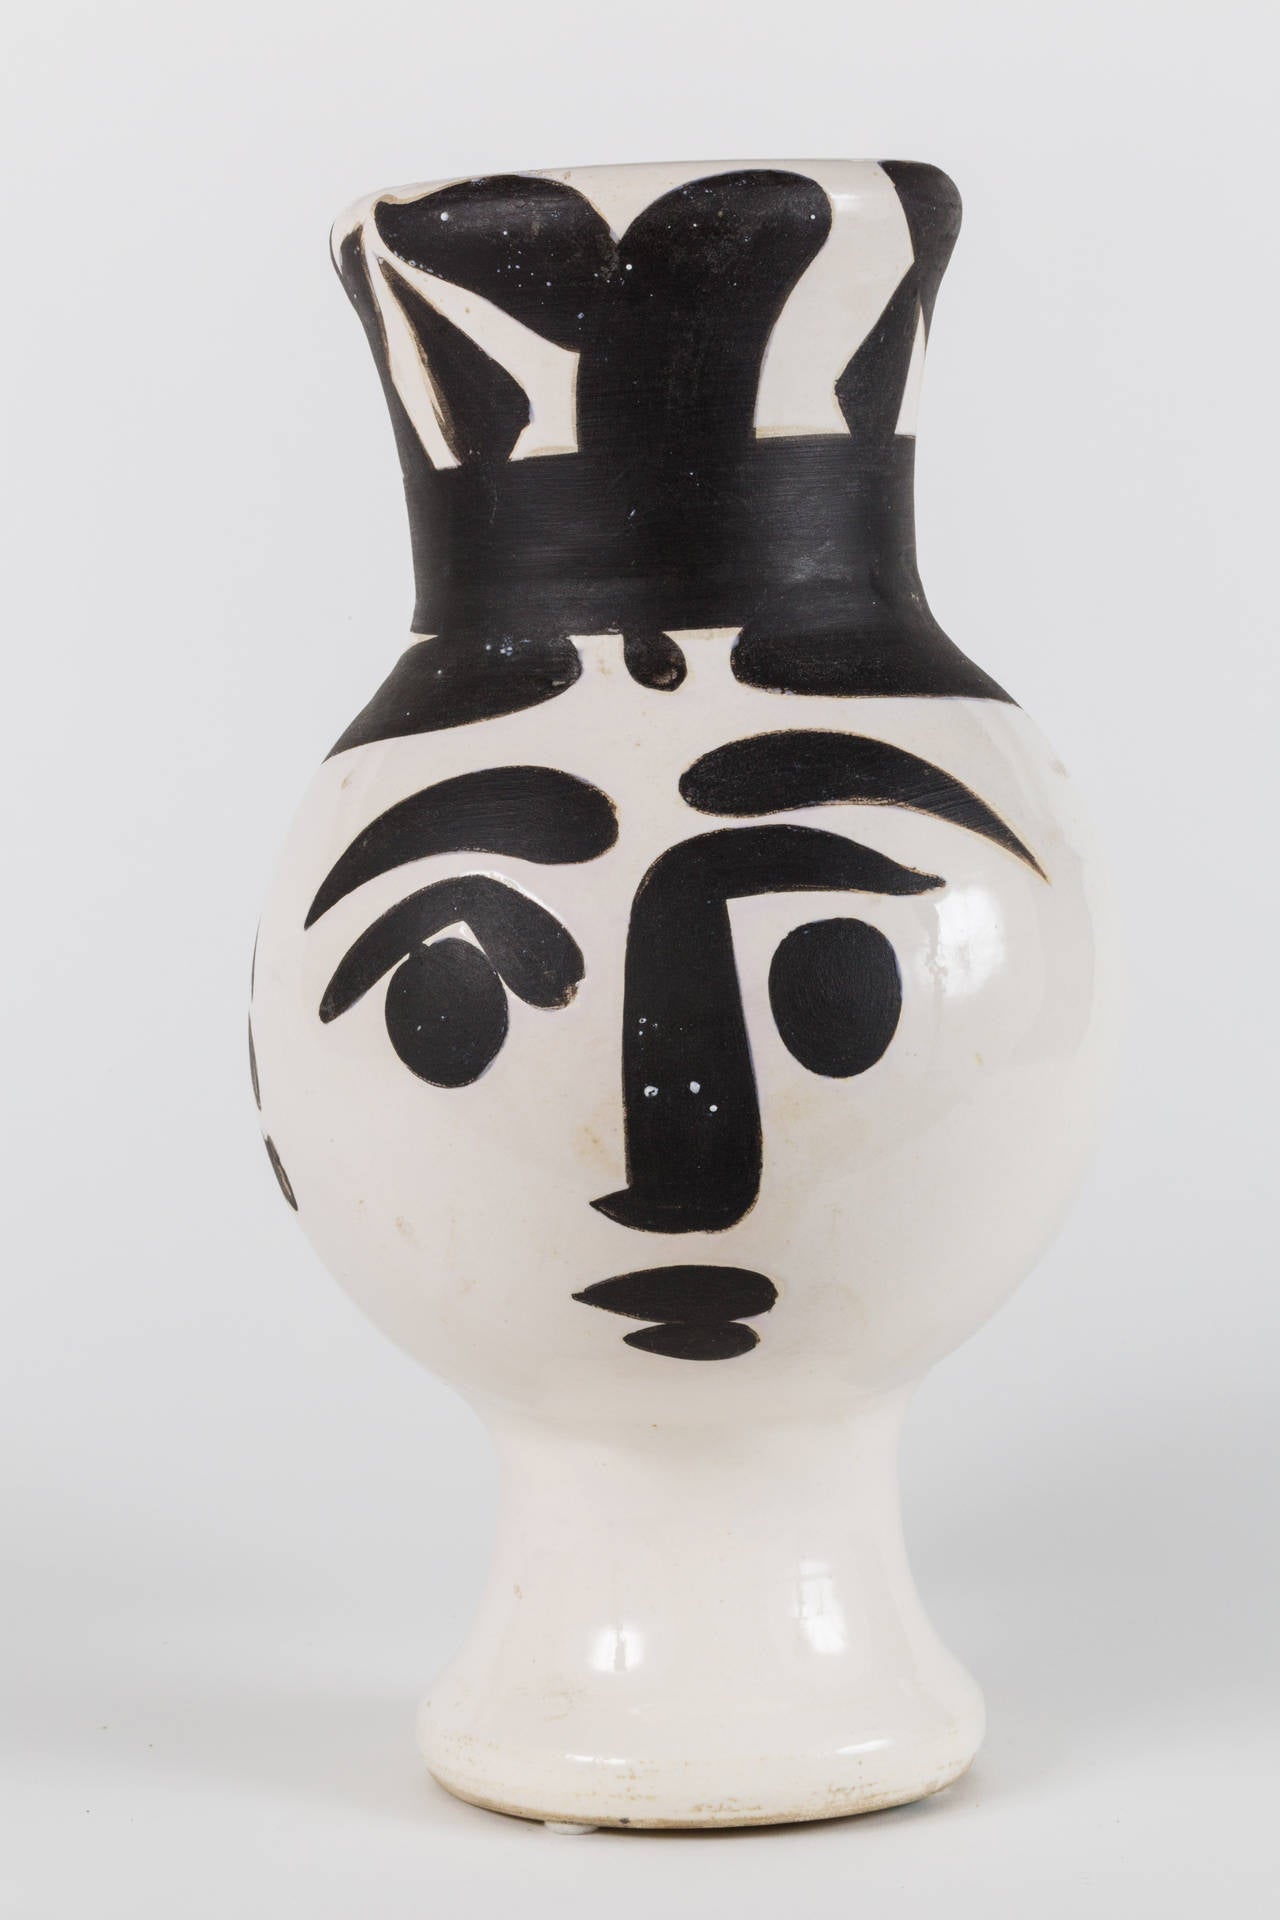 Mid-Century Modern Chouette Femme or Owl Woman Vase by Picasso for Madoura Ceramics, No. 119